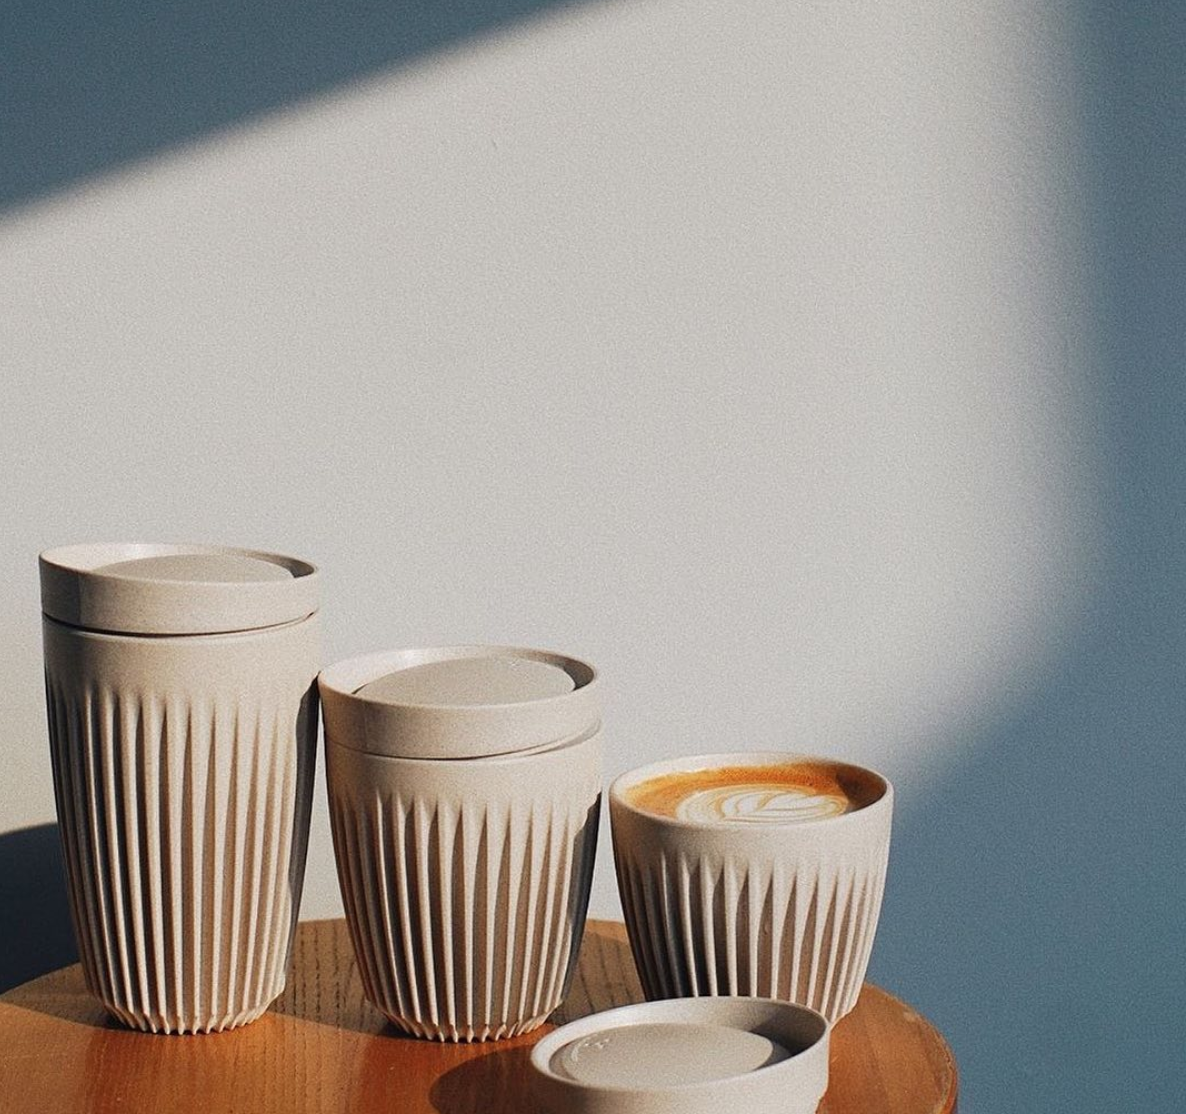 Reusable coffee cups to reduce waste and be more eco-friendly